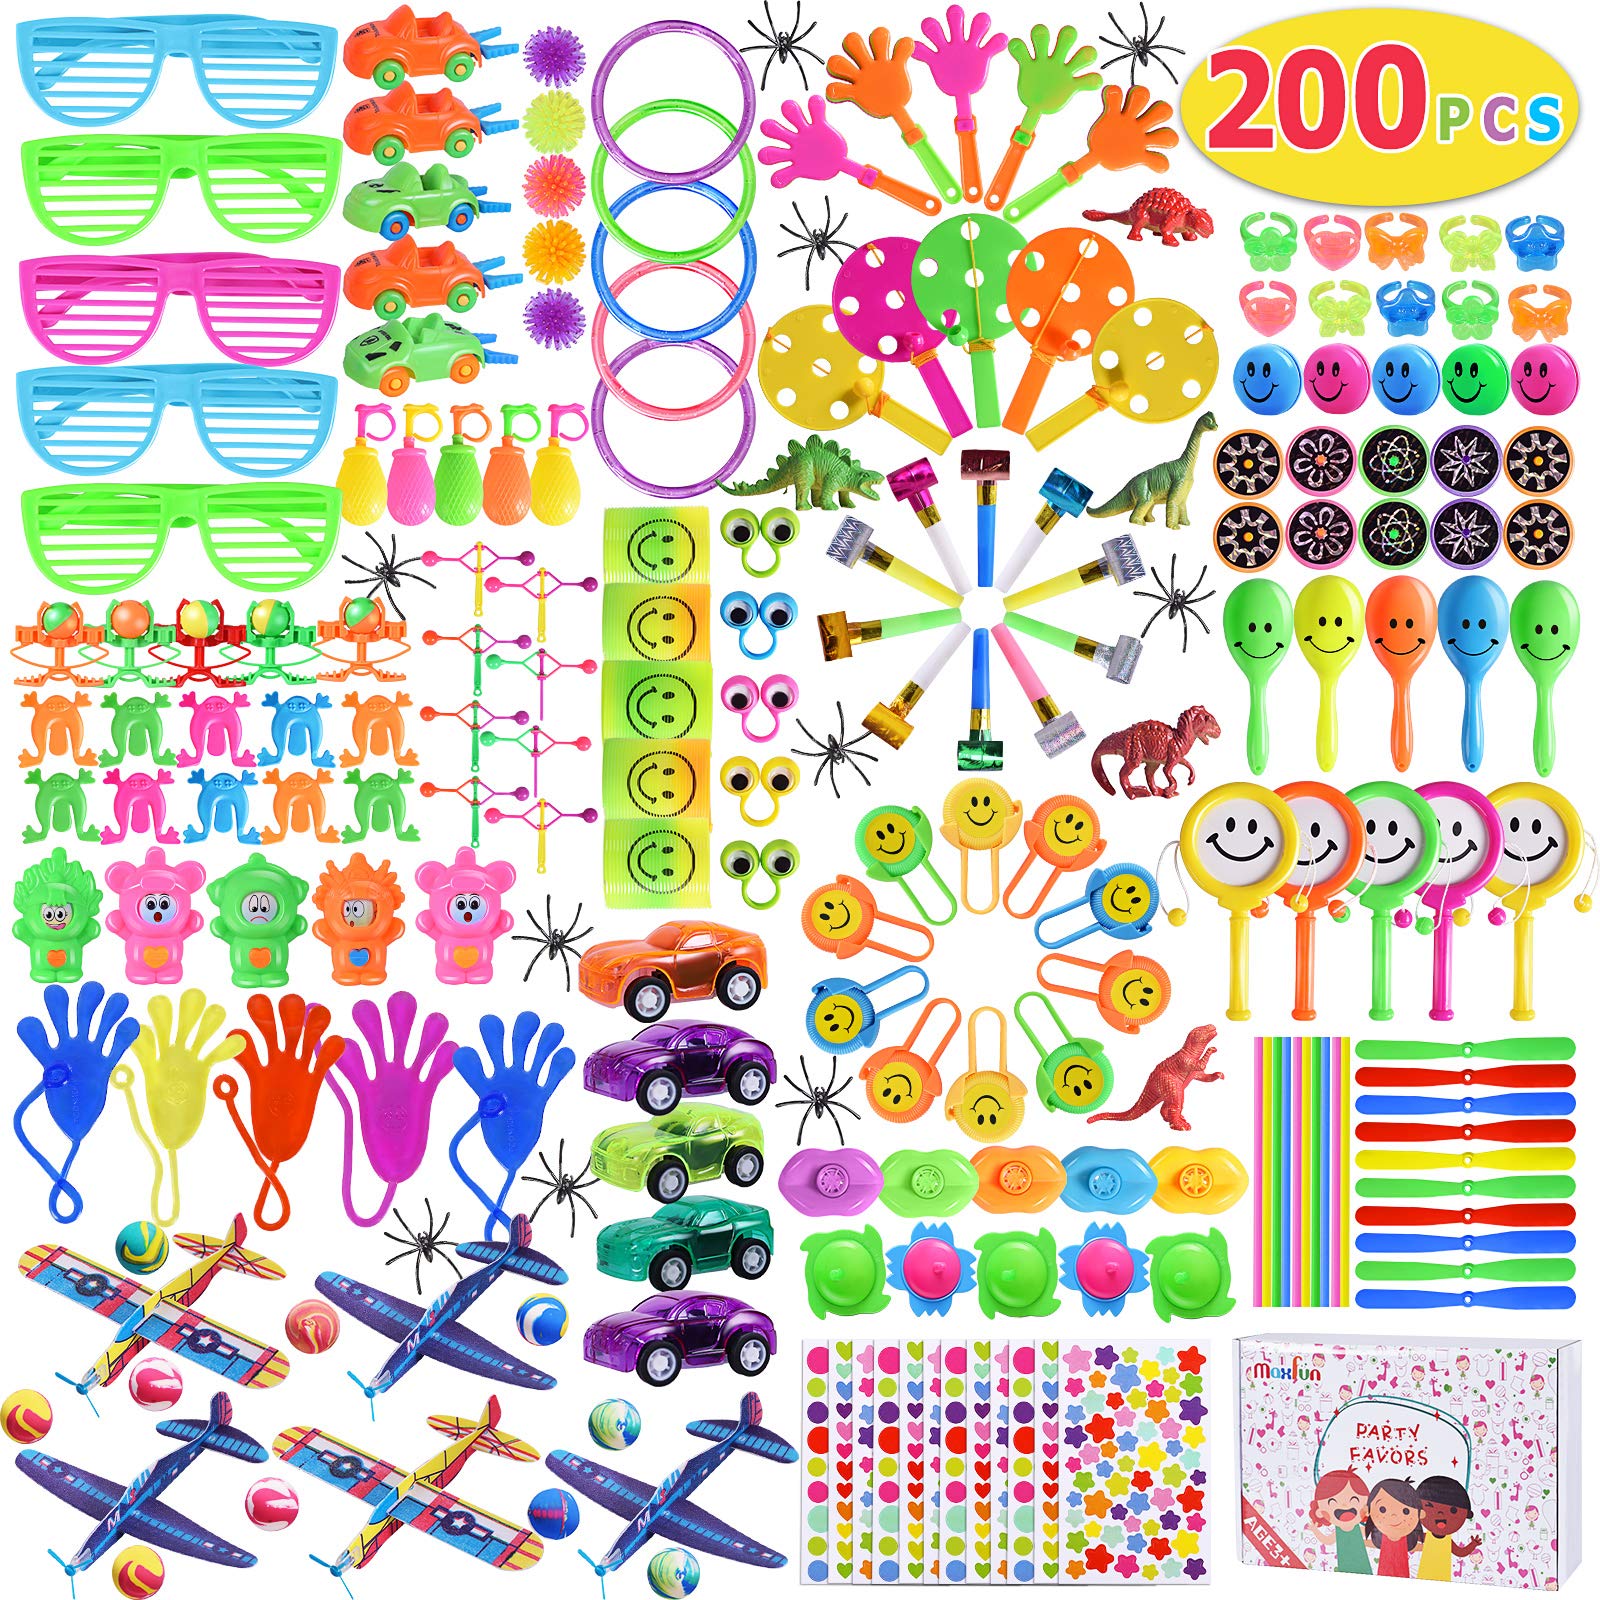 Max Fun 200Pcs Party Toys Assortment Party Favors for Kids Birthday Carnival Prizes Box Goodie Bag Fillers Classroom Rewards Pinata Filler Toys Treasure Box